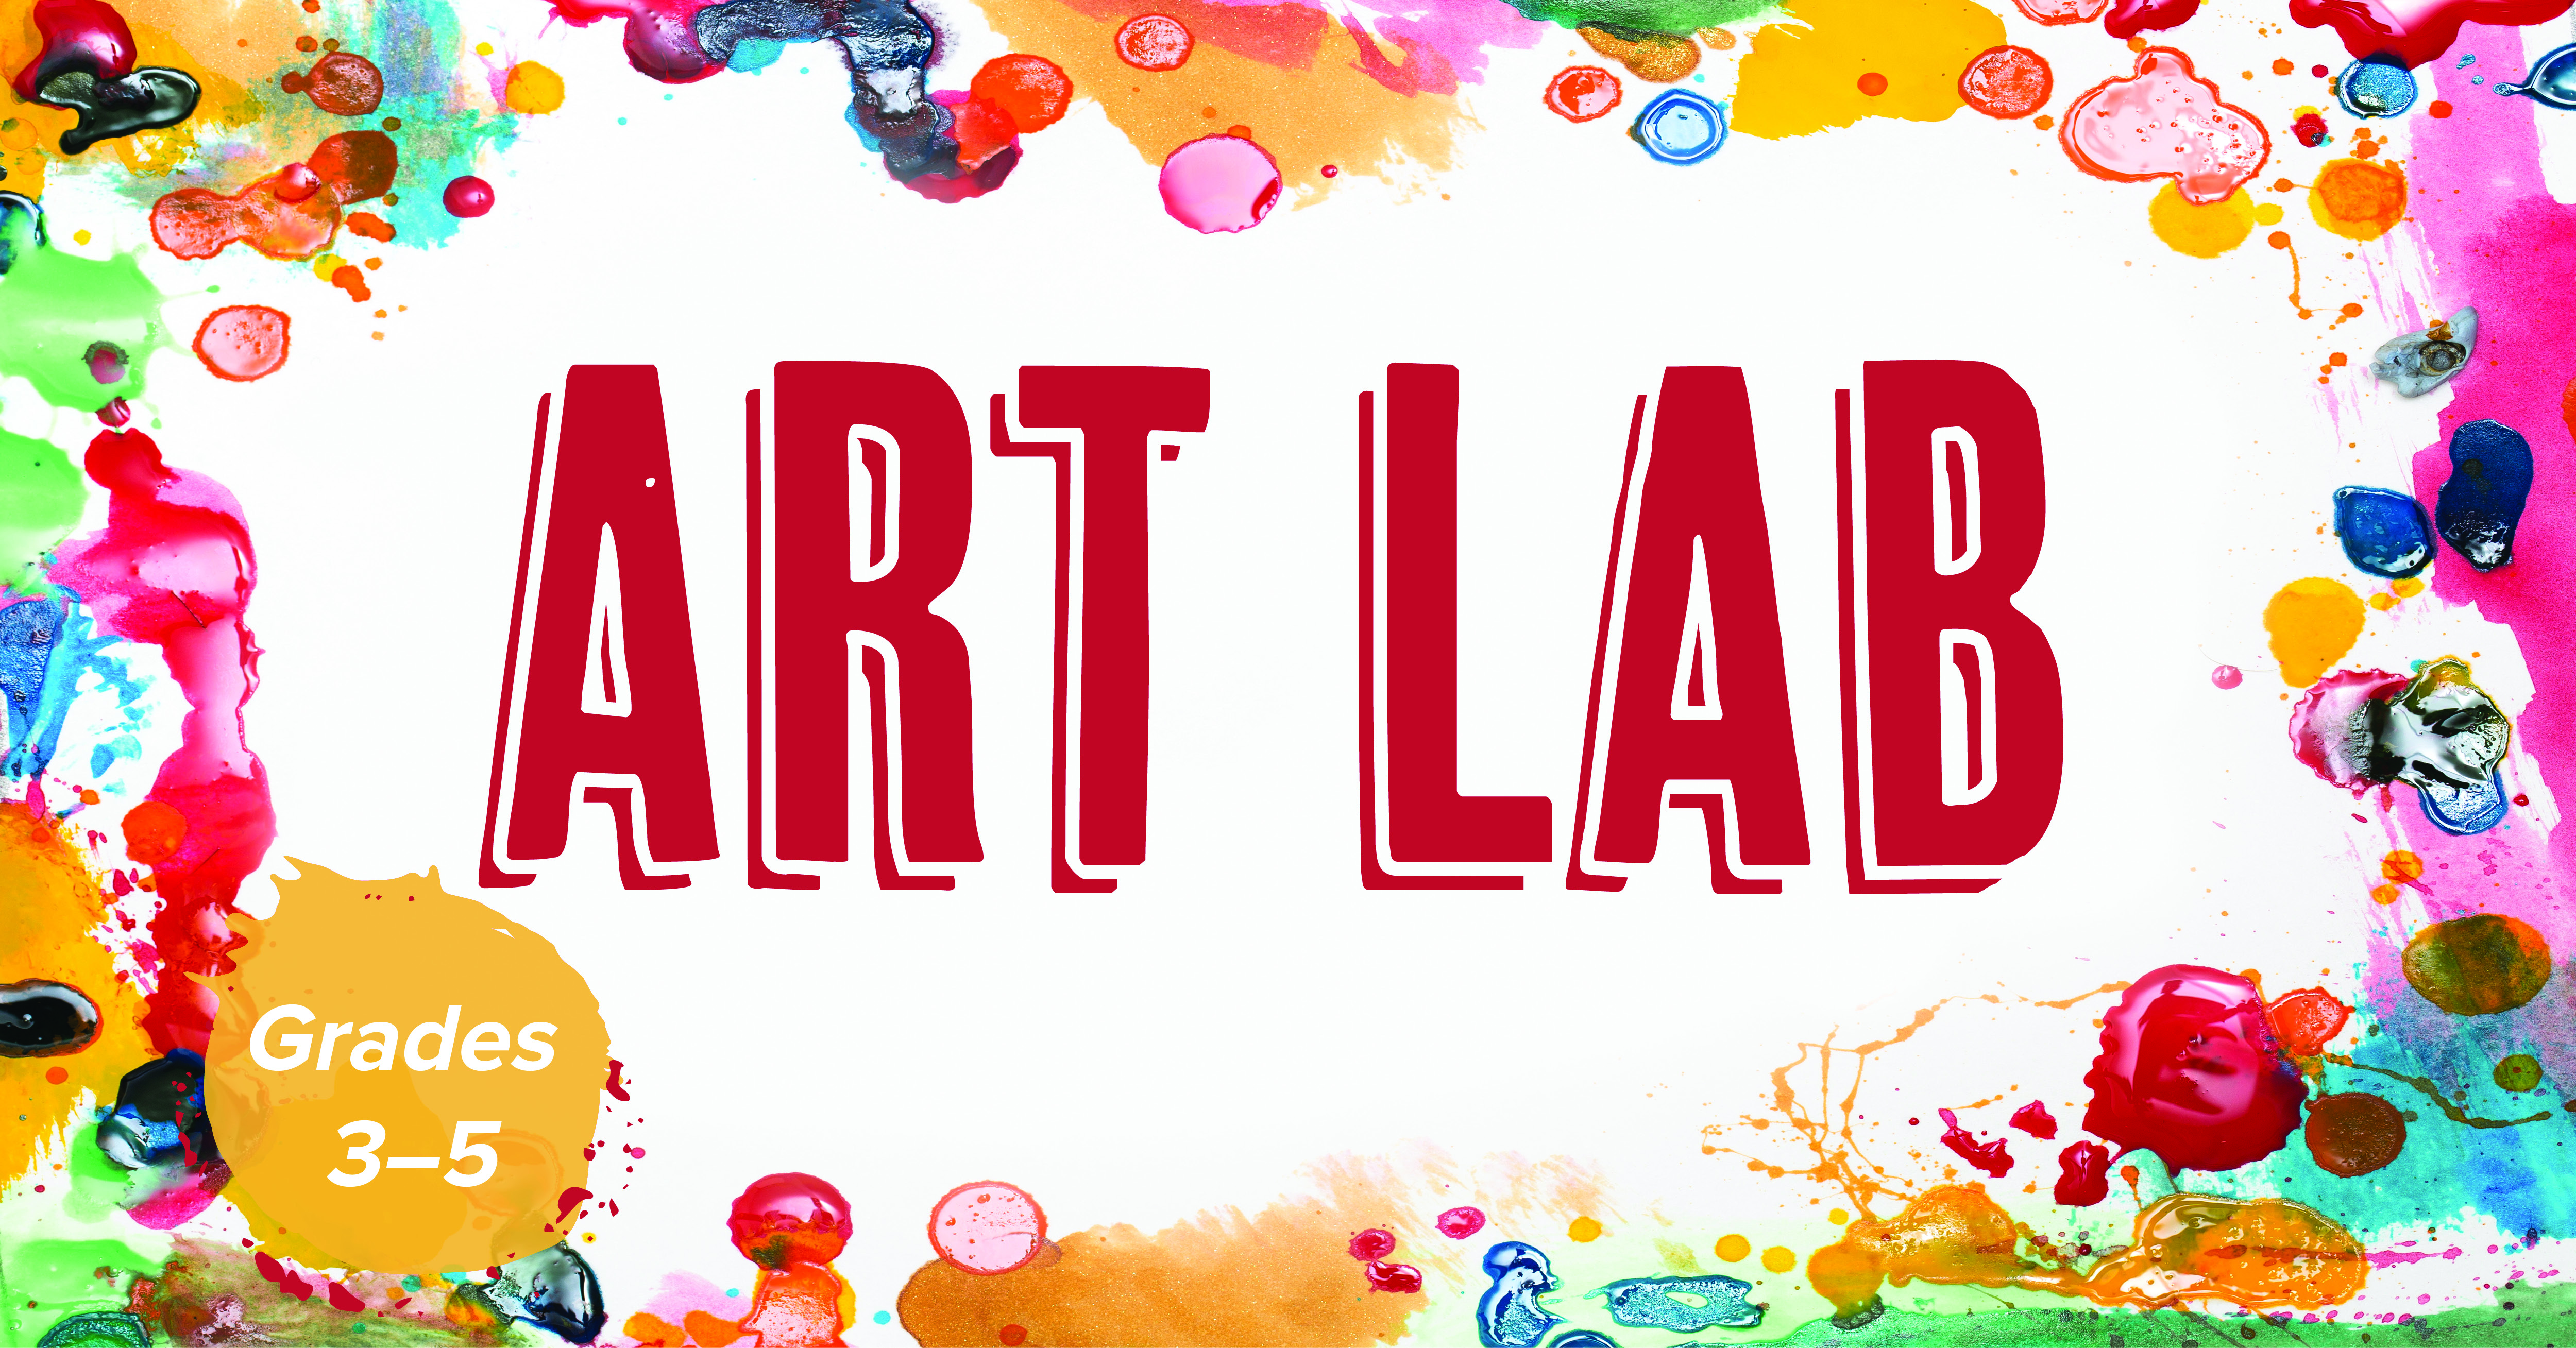 art lab written in red text over a white background with orange, pink, green, and purple paint splatters around the border